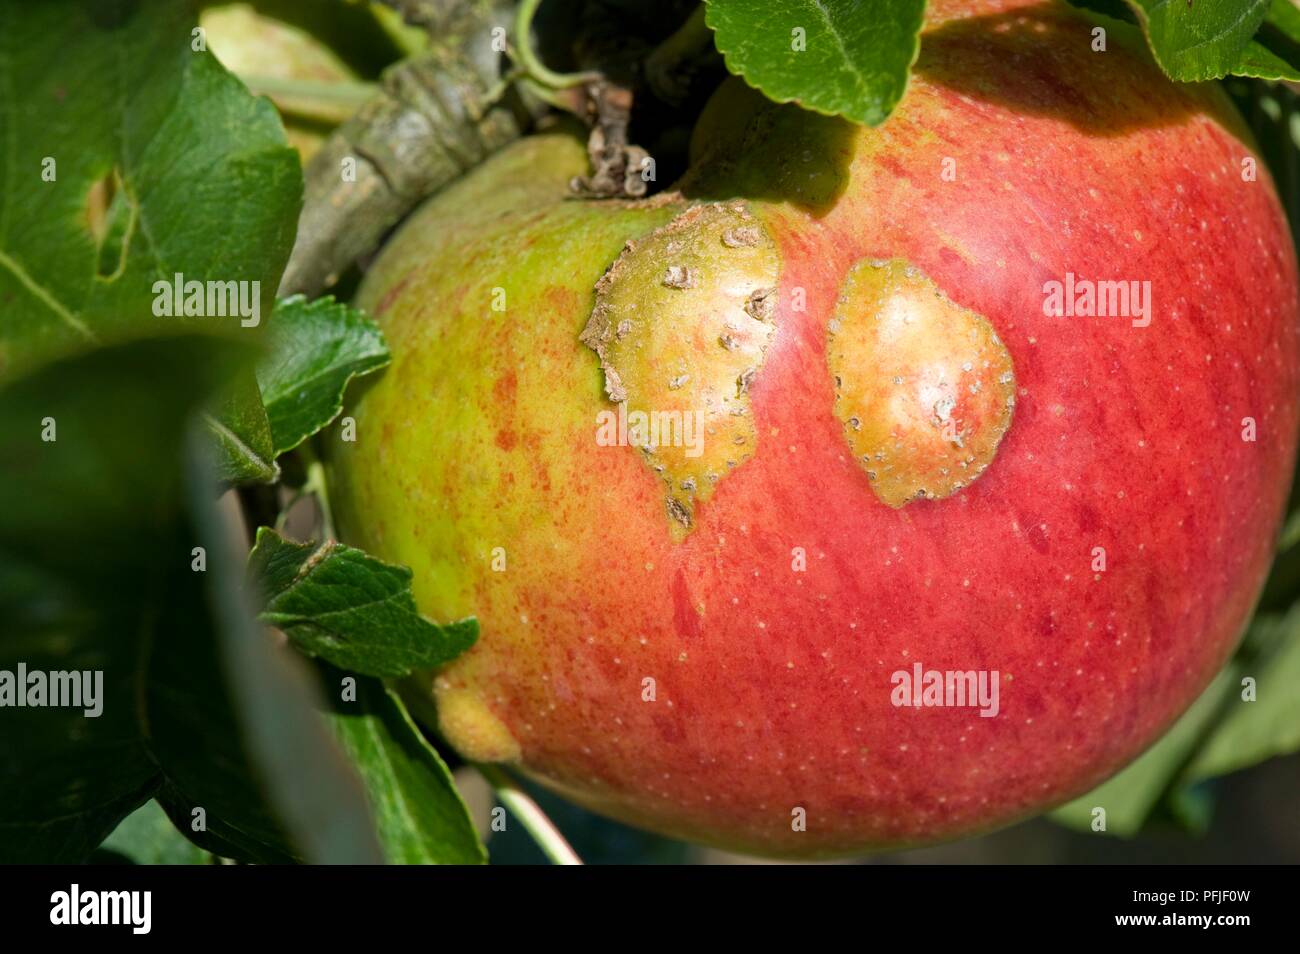 Apple infected by apple capsid, close-up Stock Photo